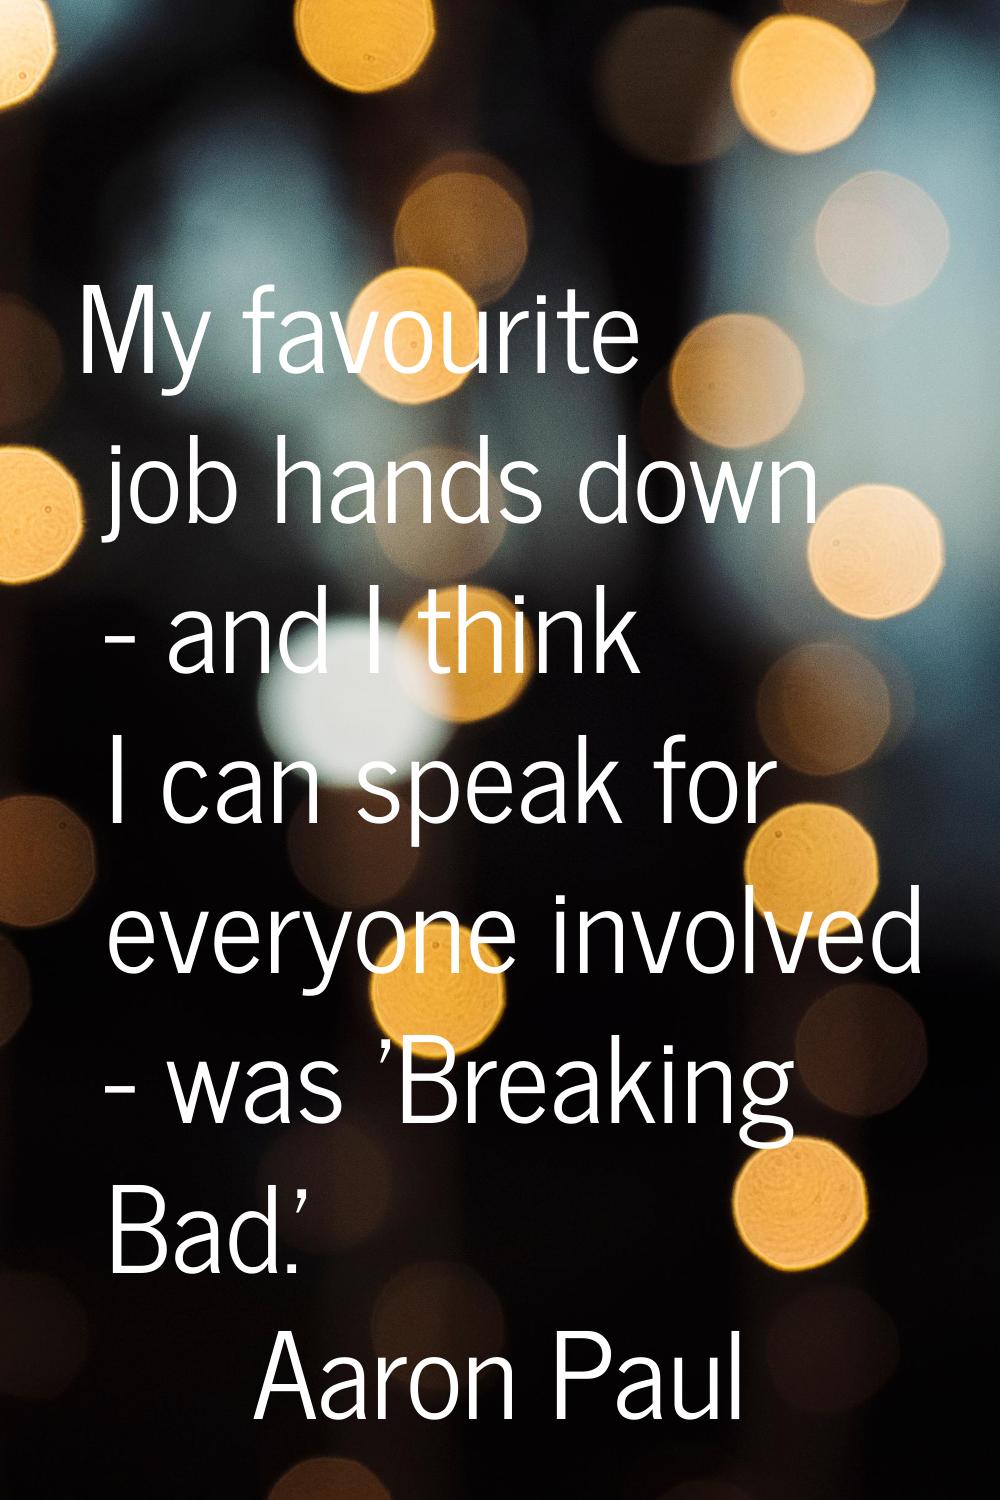 My favourite job hands down - and I think I can speak for everyone involved - was 'Breaking Bad.'